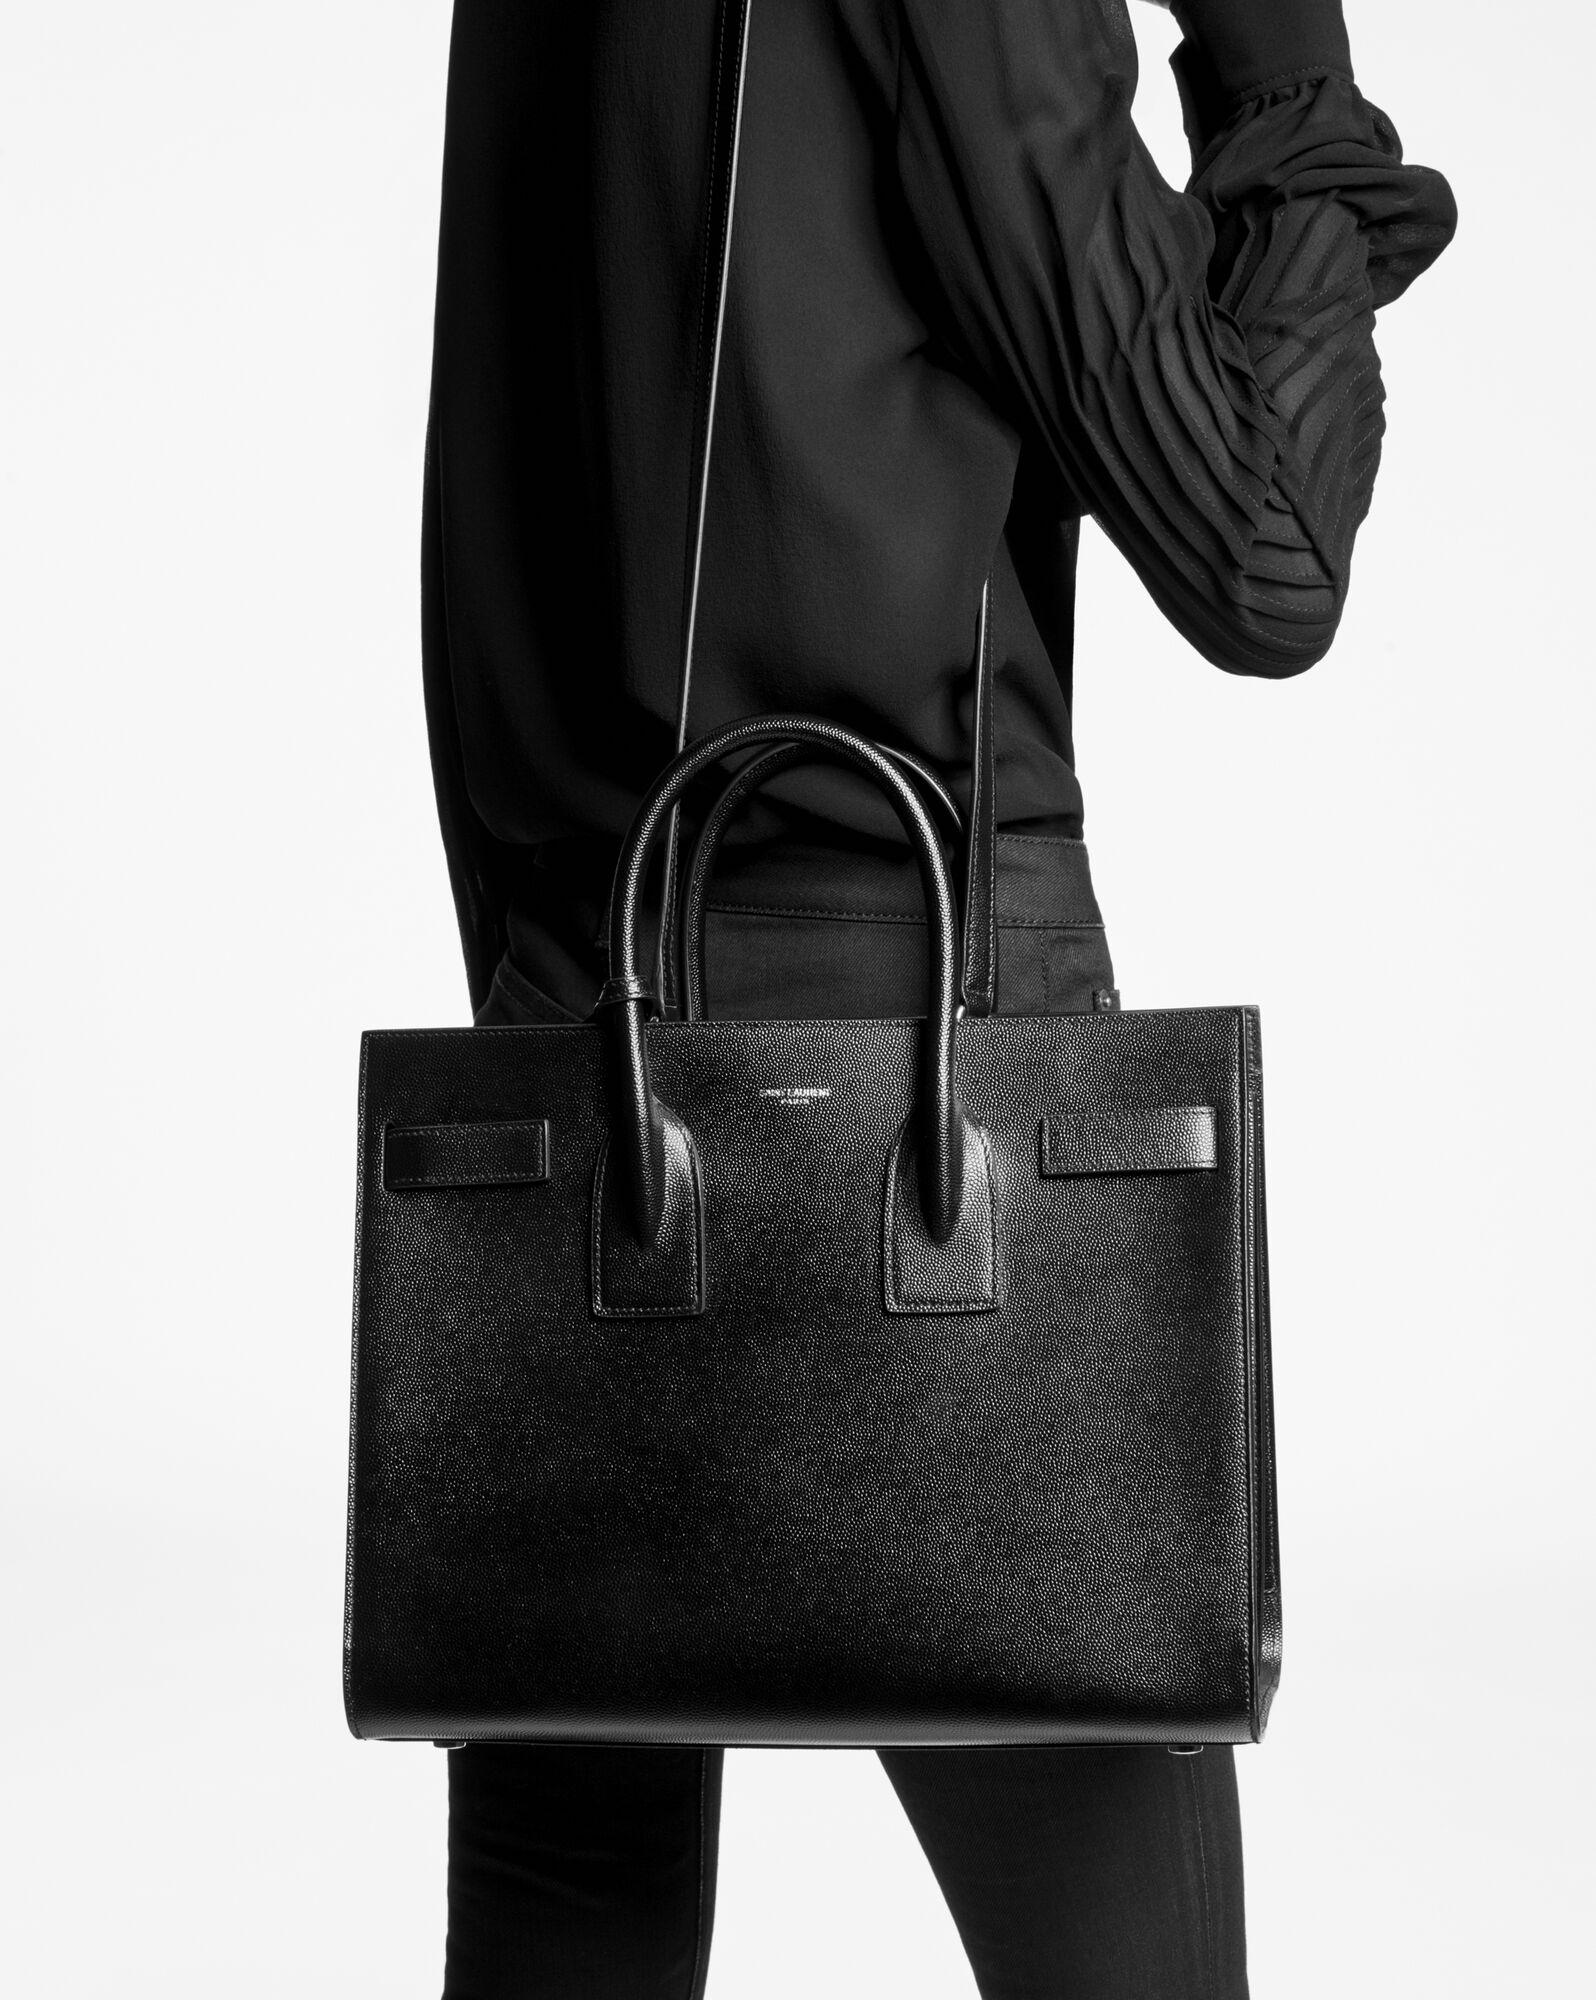 Saint Laurent Classic Sac De Jour Small In Smooth Leather And Cane 